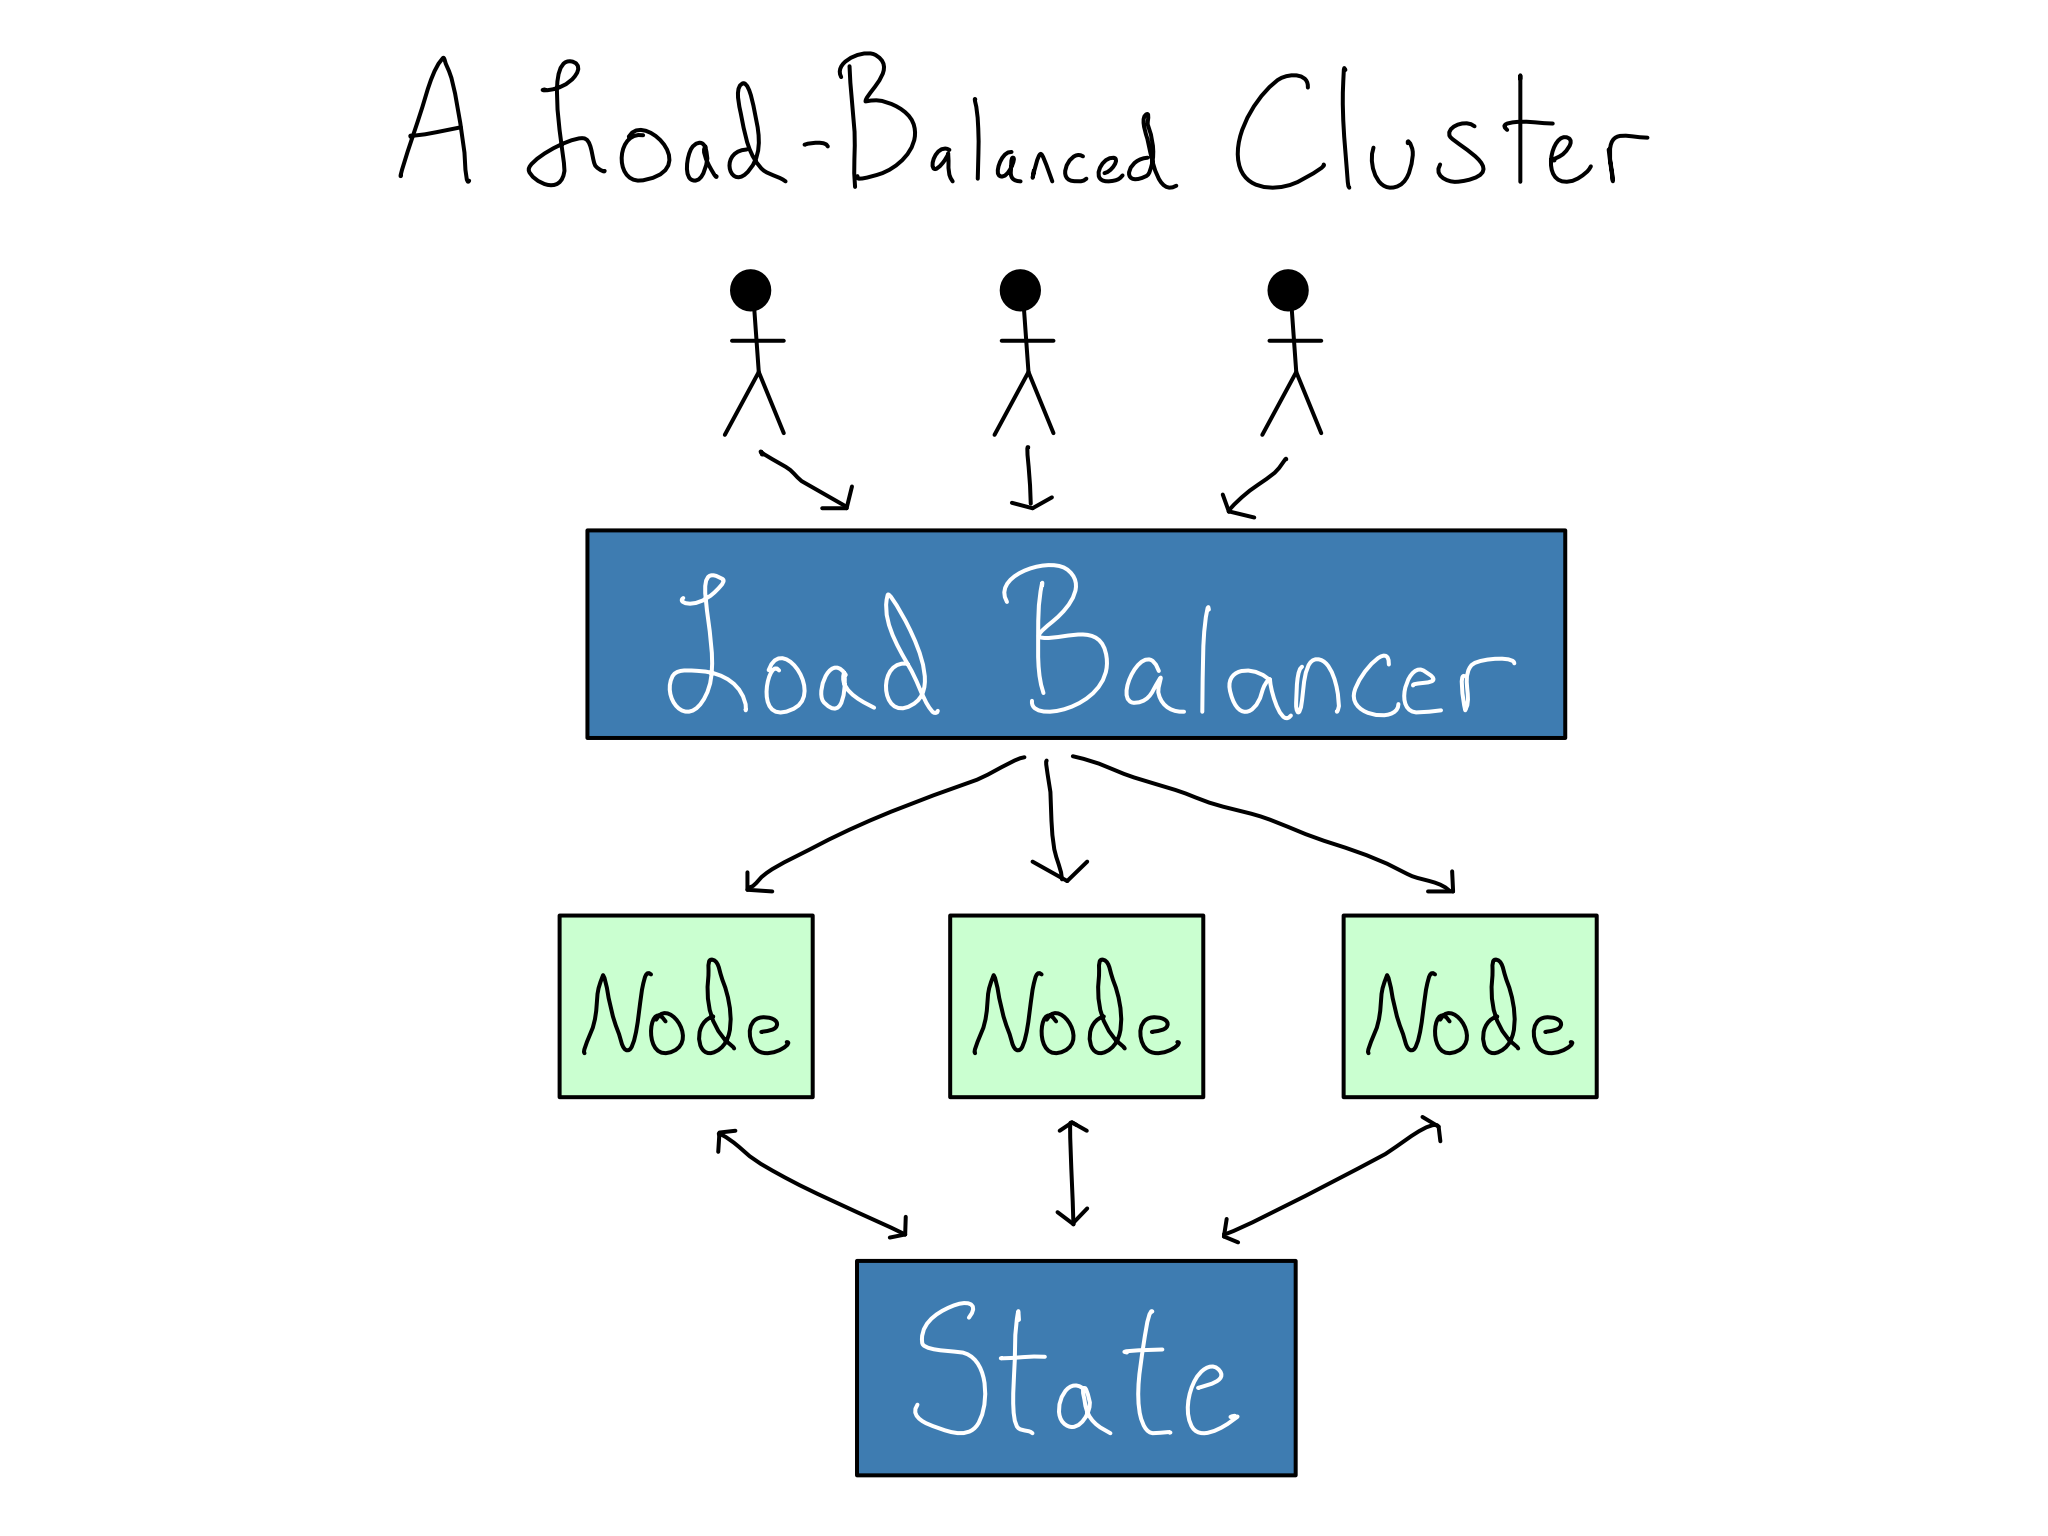 Users come to the load balancer, which sends them to the nodes, which connect to the state.